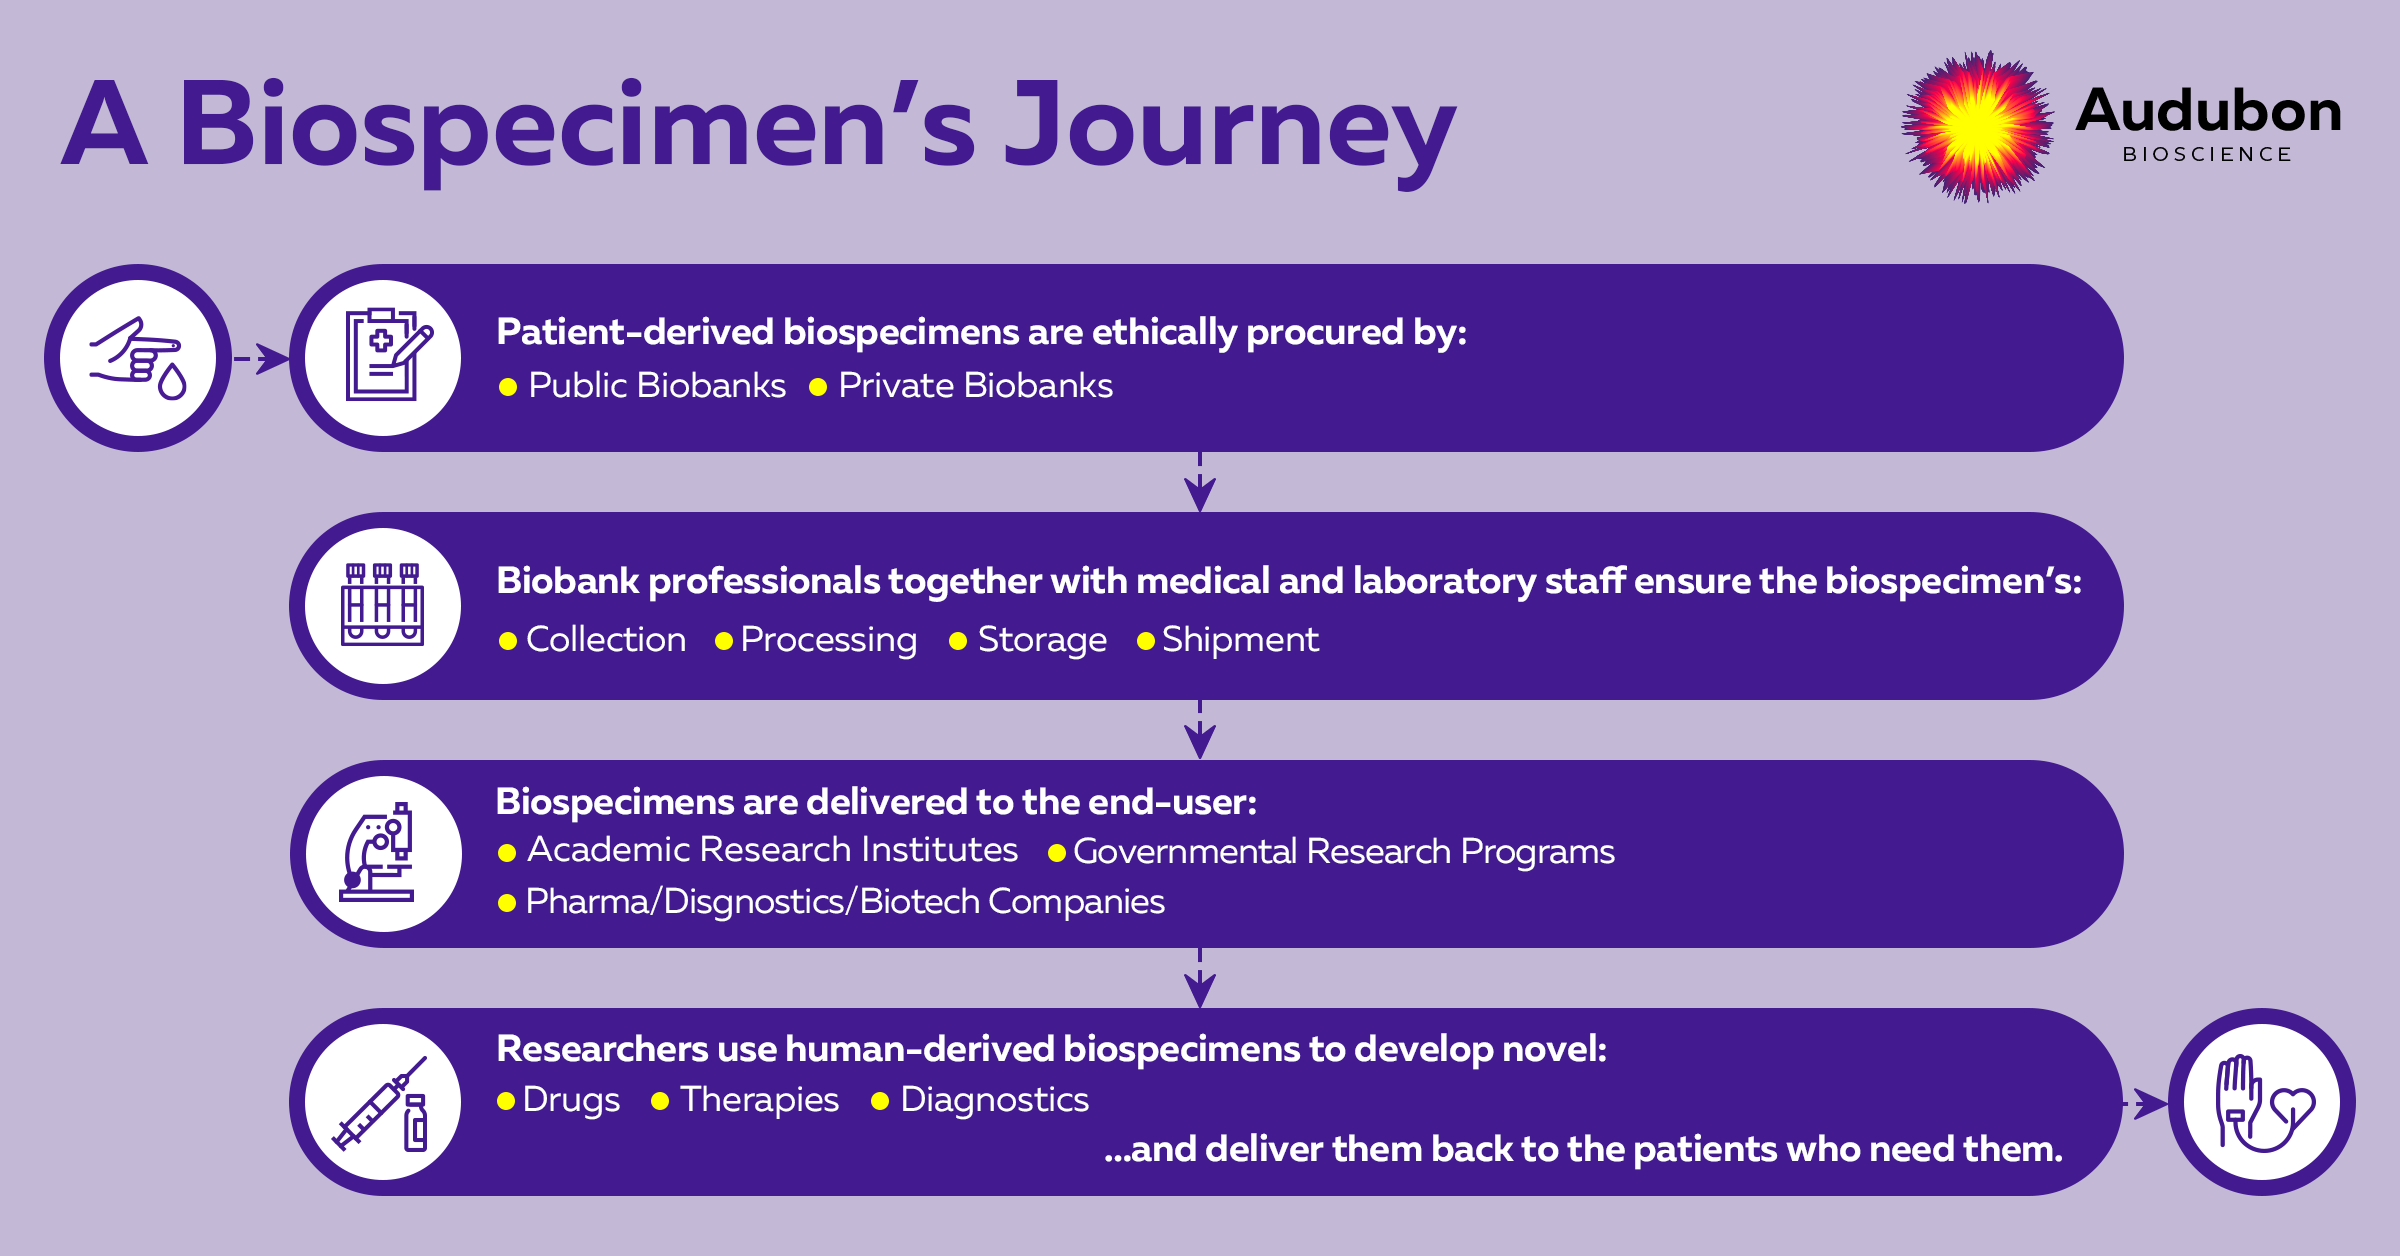 The journey of biospecimens along the drug discovery process.